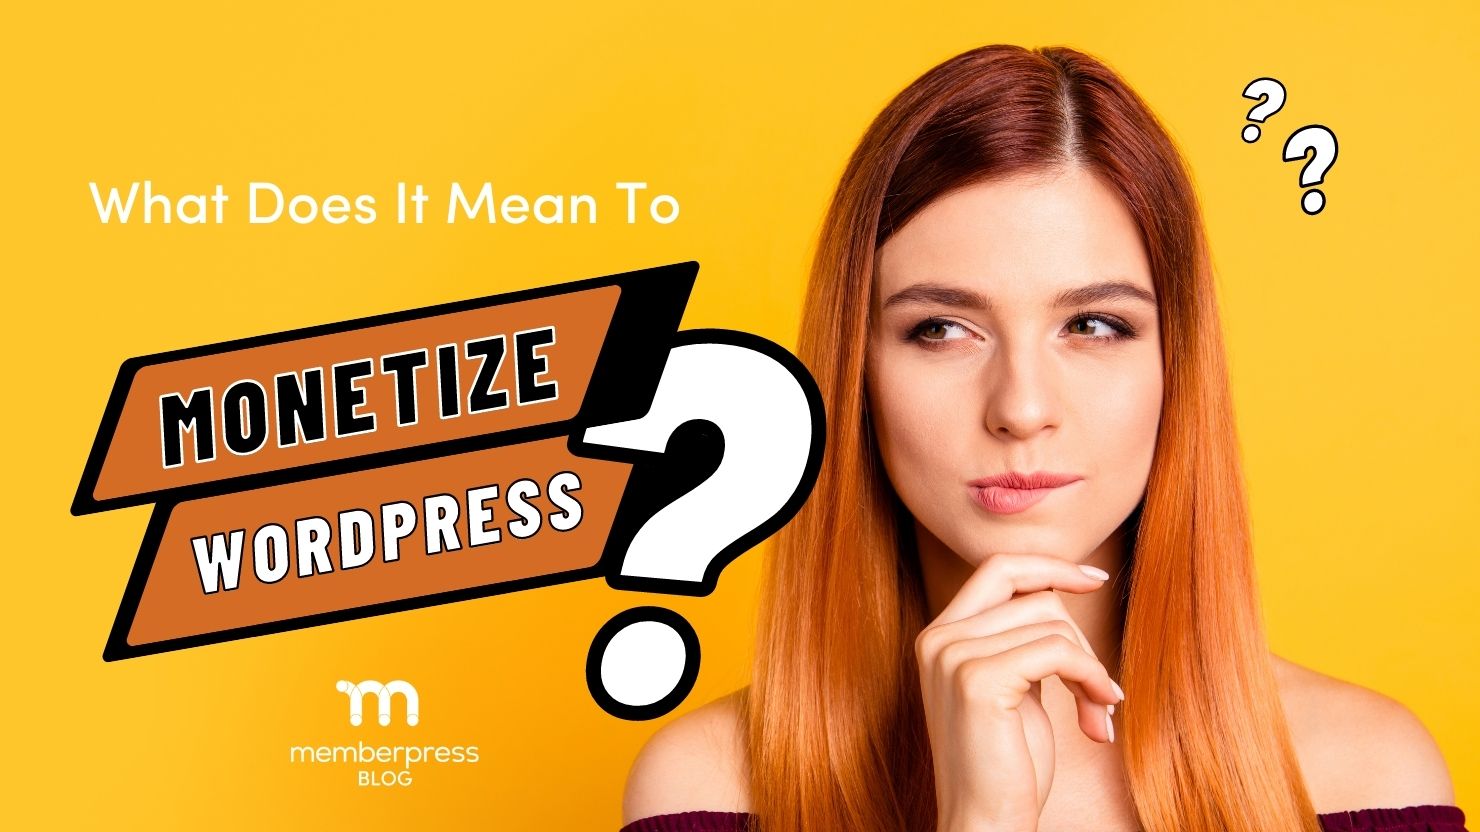 What does it mean to monetize wordpress